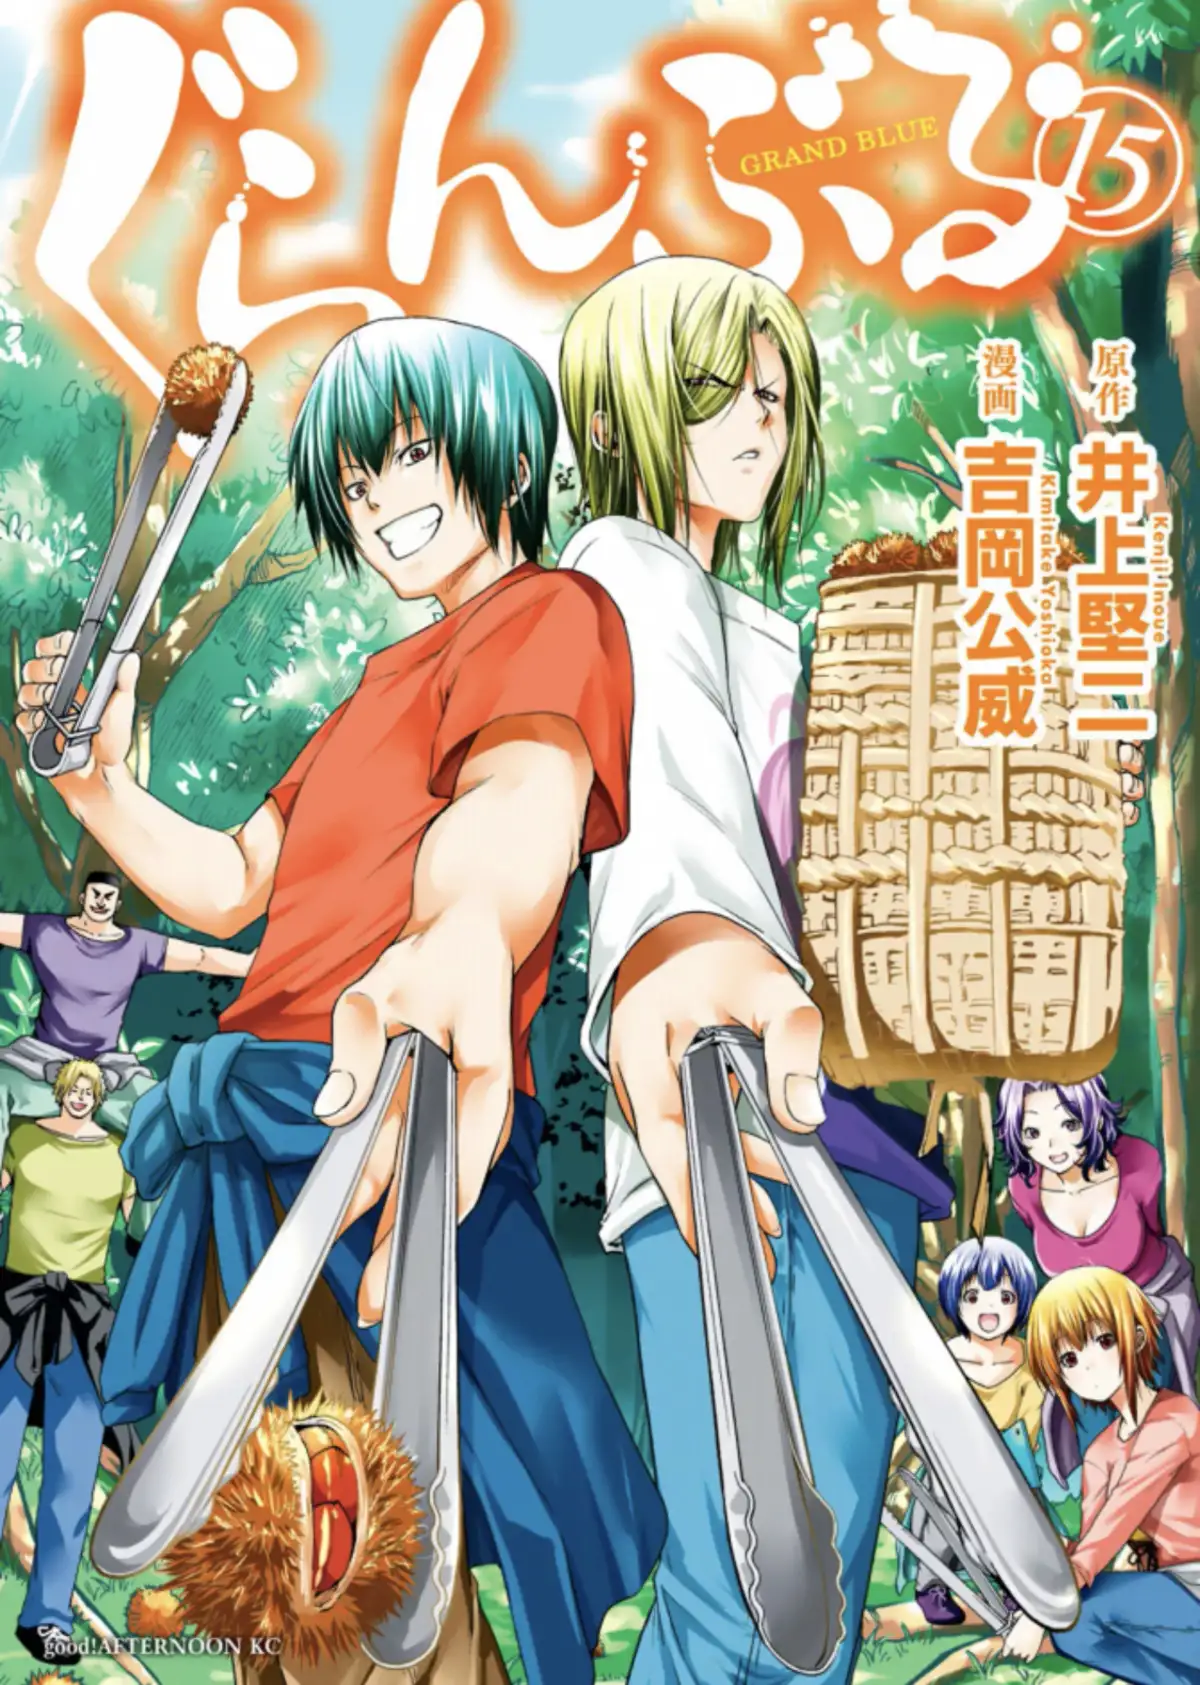 Grand Blue Volume 15 page 1